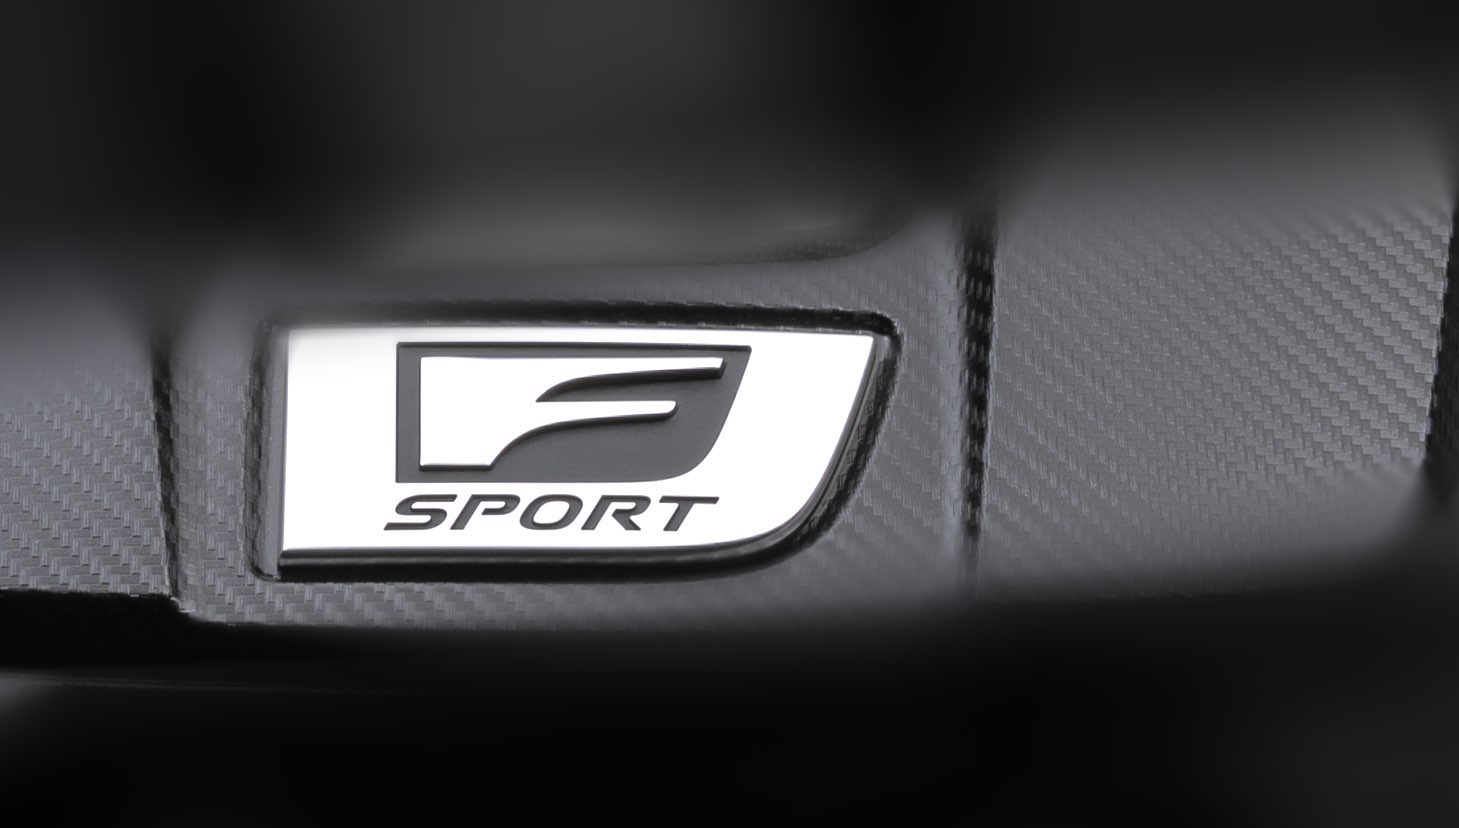 New Lexus F Sport model previewed, could it be the IS 500?